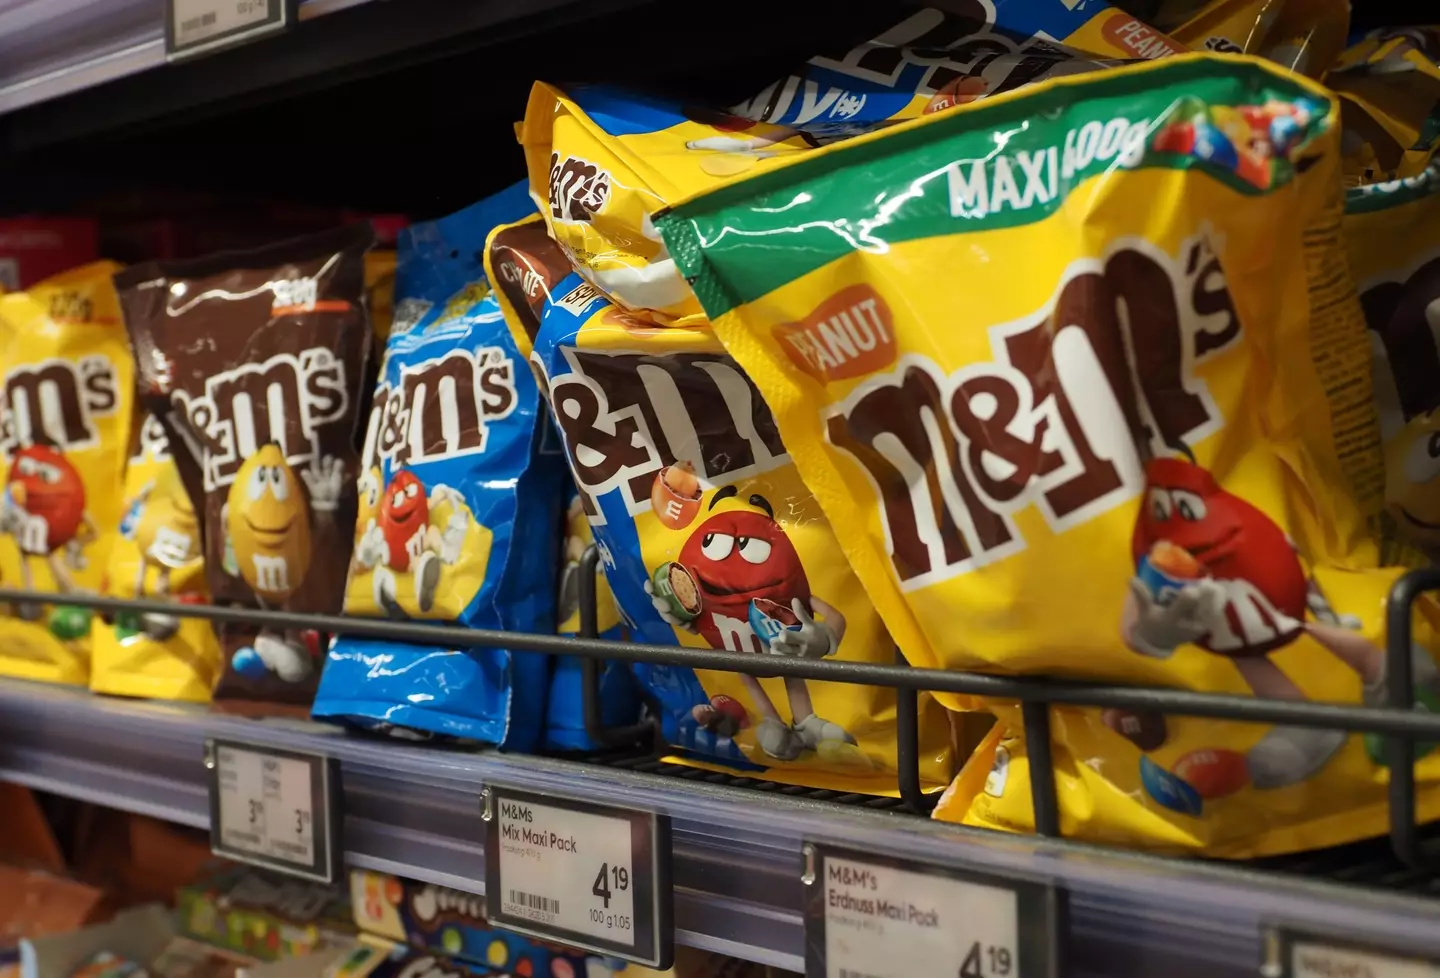 People have been left surprised over what M&M's initials stand for and the history behind the chocolate brand.